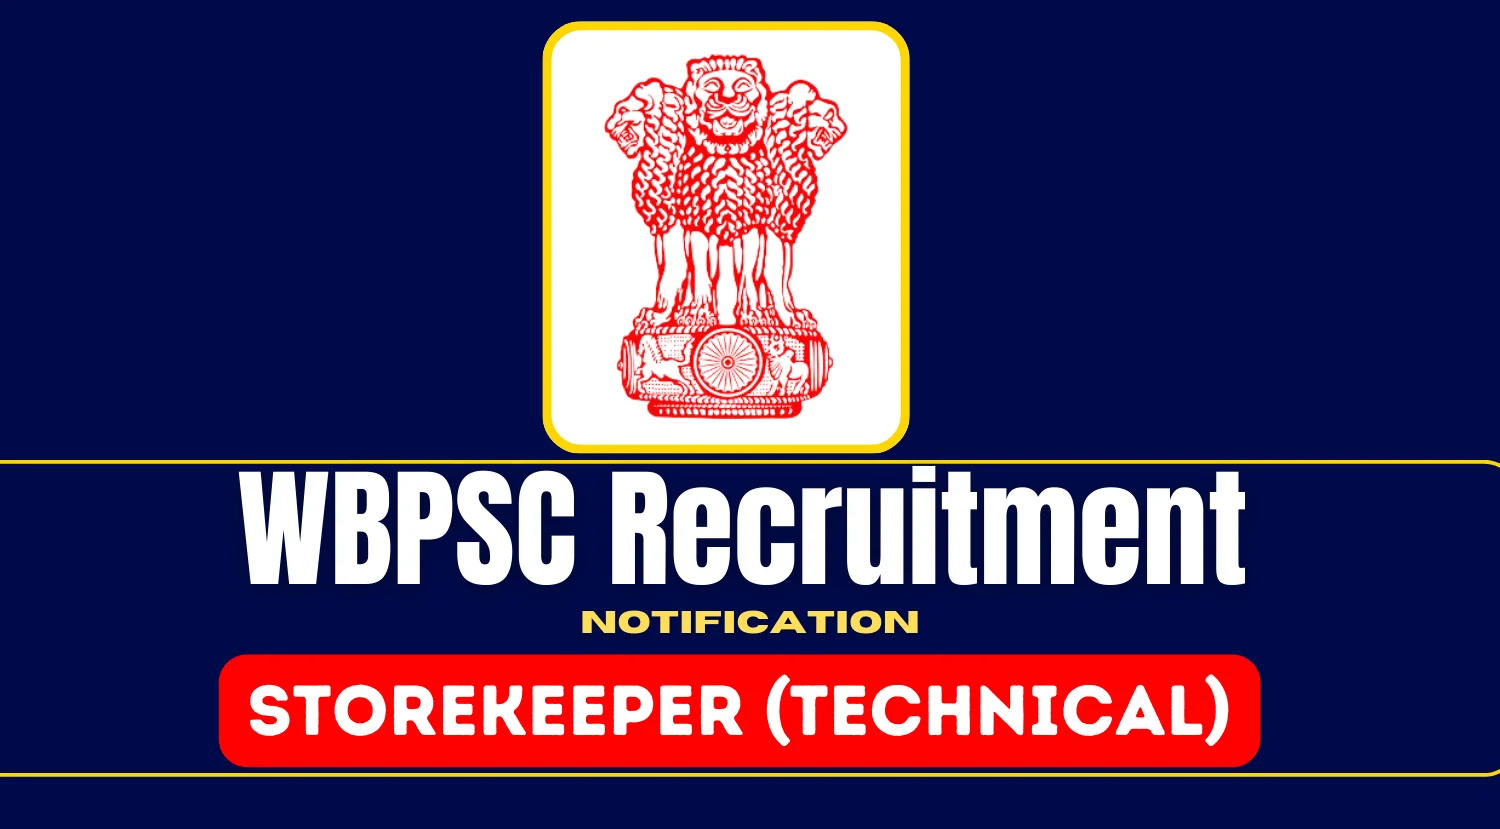 WBPSC Recruitment for Storekeeper (Technical) Vacancies